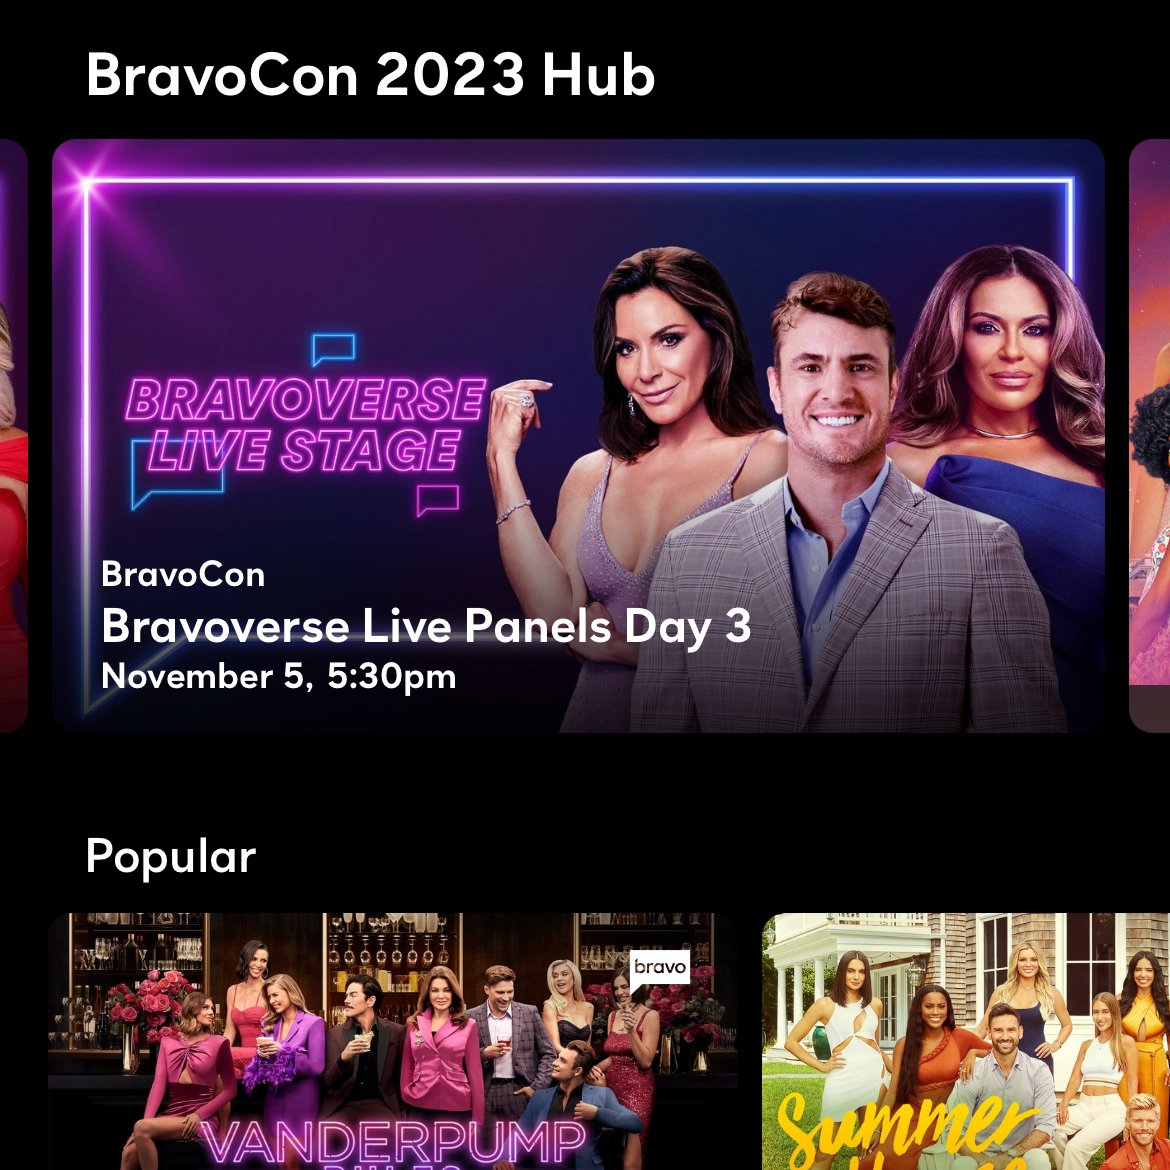 PSA: If you're getting #BravoCon updates from the comfort of your couch, you can watch the Bravoverse Live Stage panels each night beginning at 5:30 pm ET, streaming on Peacock. Plus, more exclusive panels dropping throughout the weekend and into next week 😘